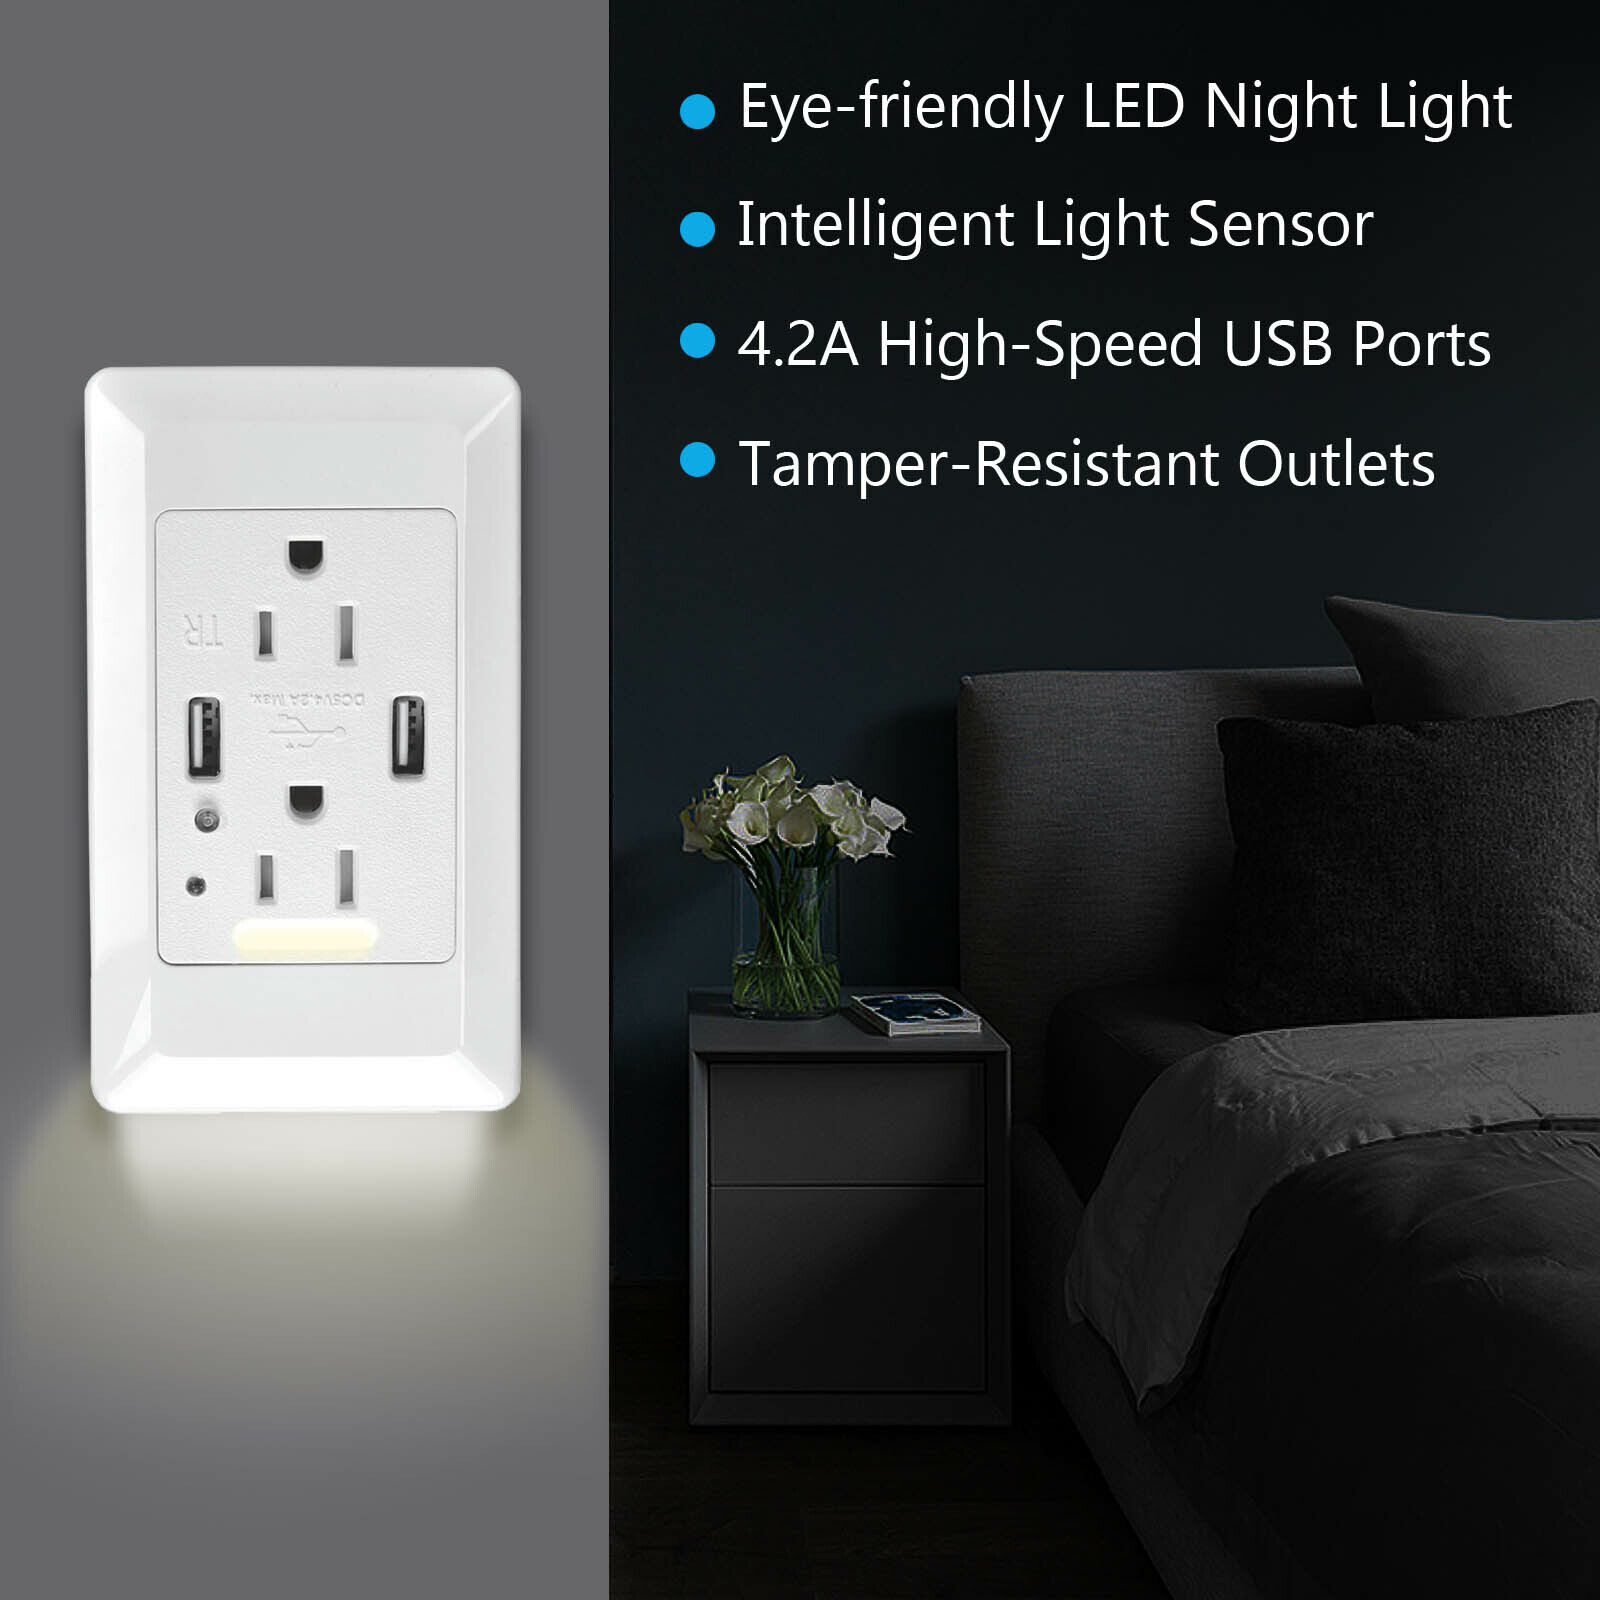 With LED Nightlight 4.2A Smart High Speed USB Outlet Home Wall Socket Panel Plug